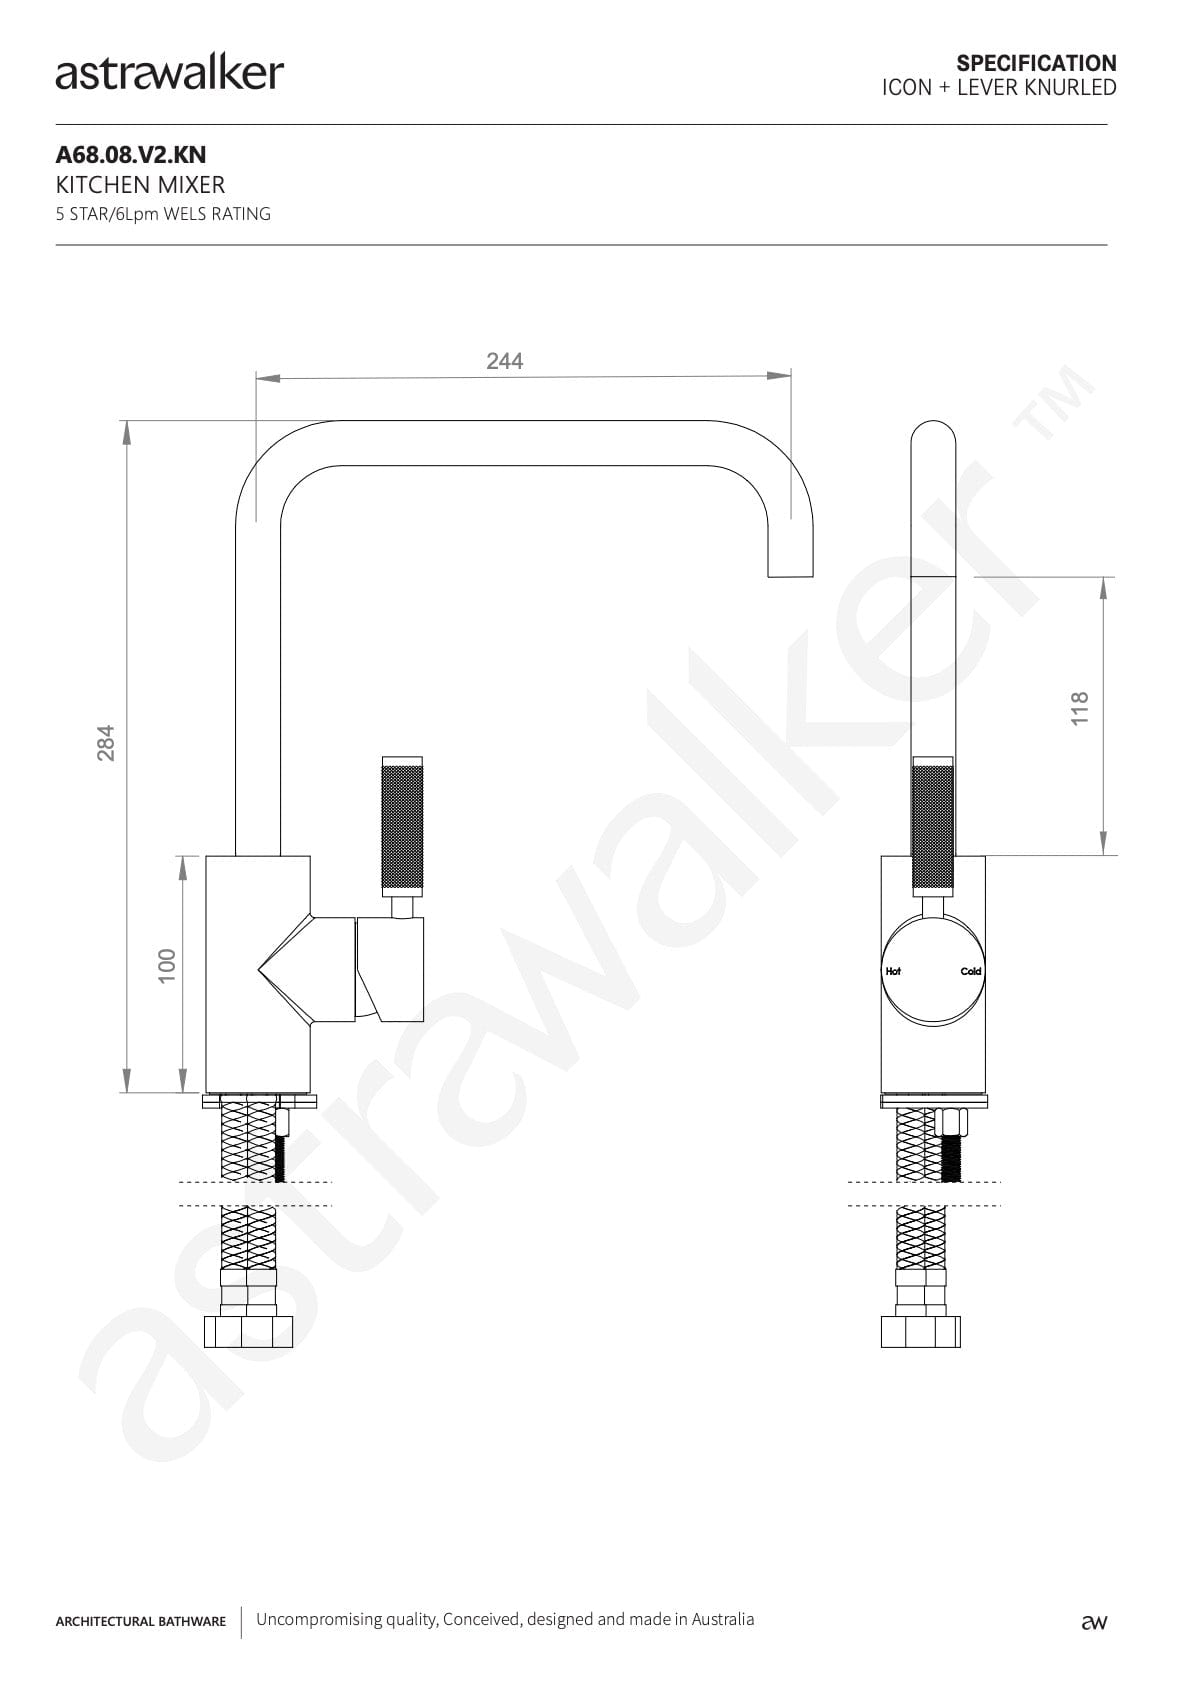 Astra Walker Kitchen Taps Astra Walker Knurled Icon + Lever Traditional Sink Mixer